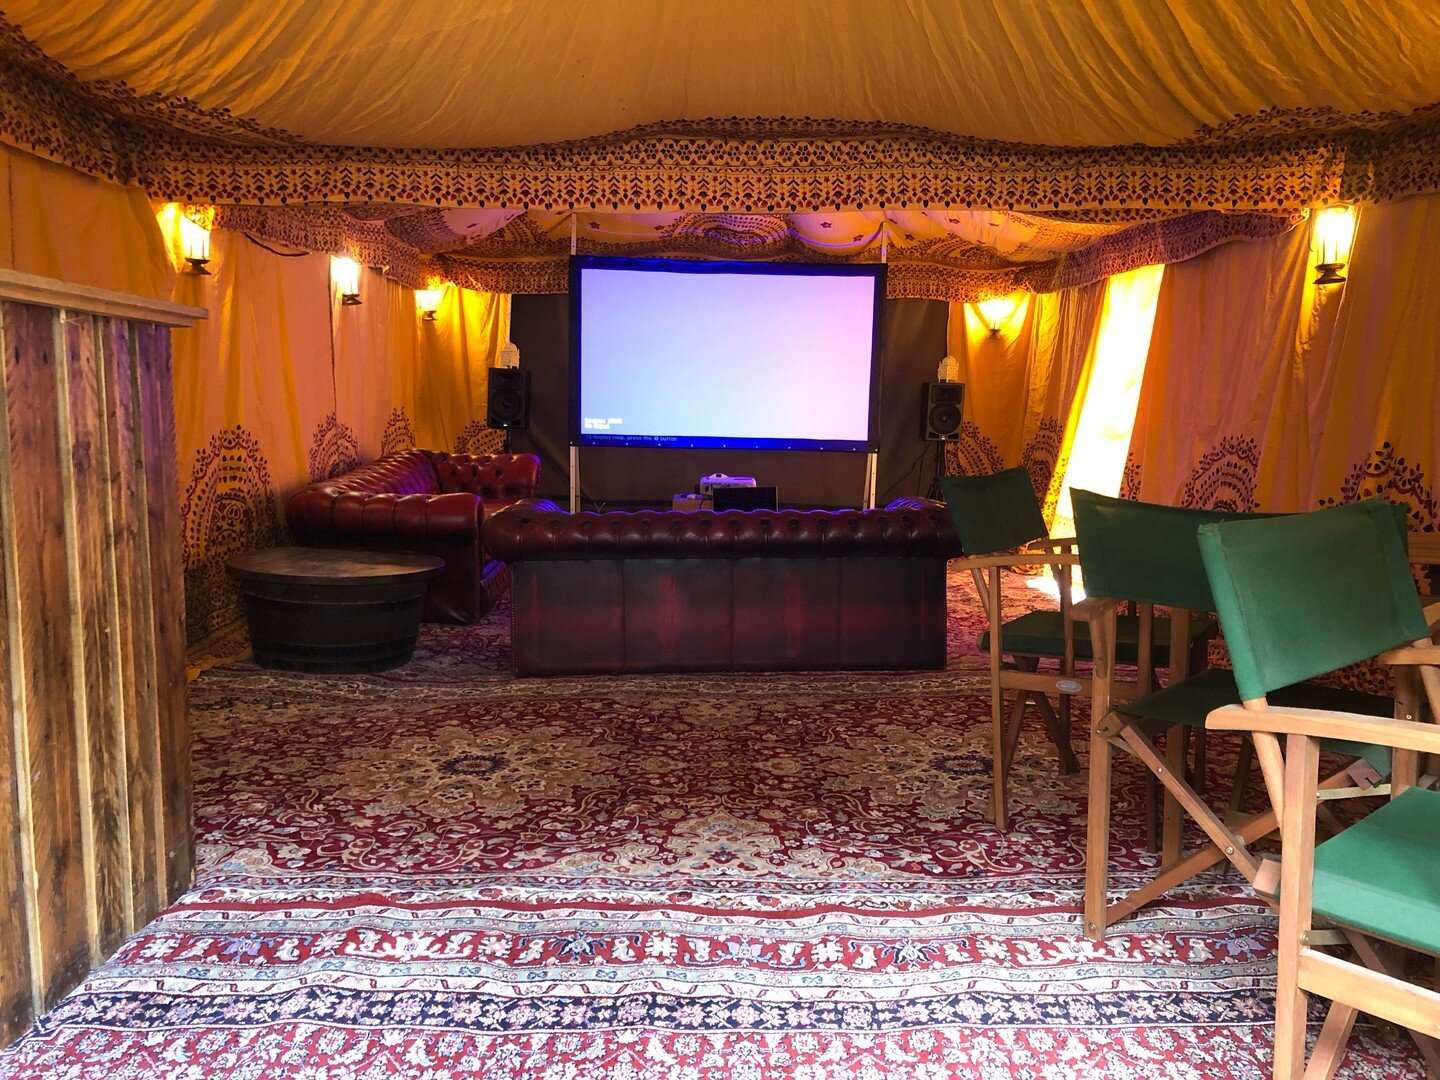 A little peak at our 4.5m x 9m luxury marquee cinema ! 

--
 
#familytime #gardenparty #cinemahire #glamping #outdoormovienight #kids